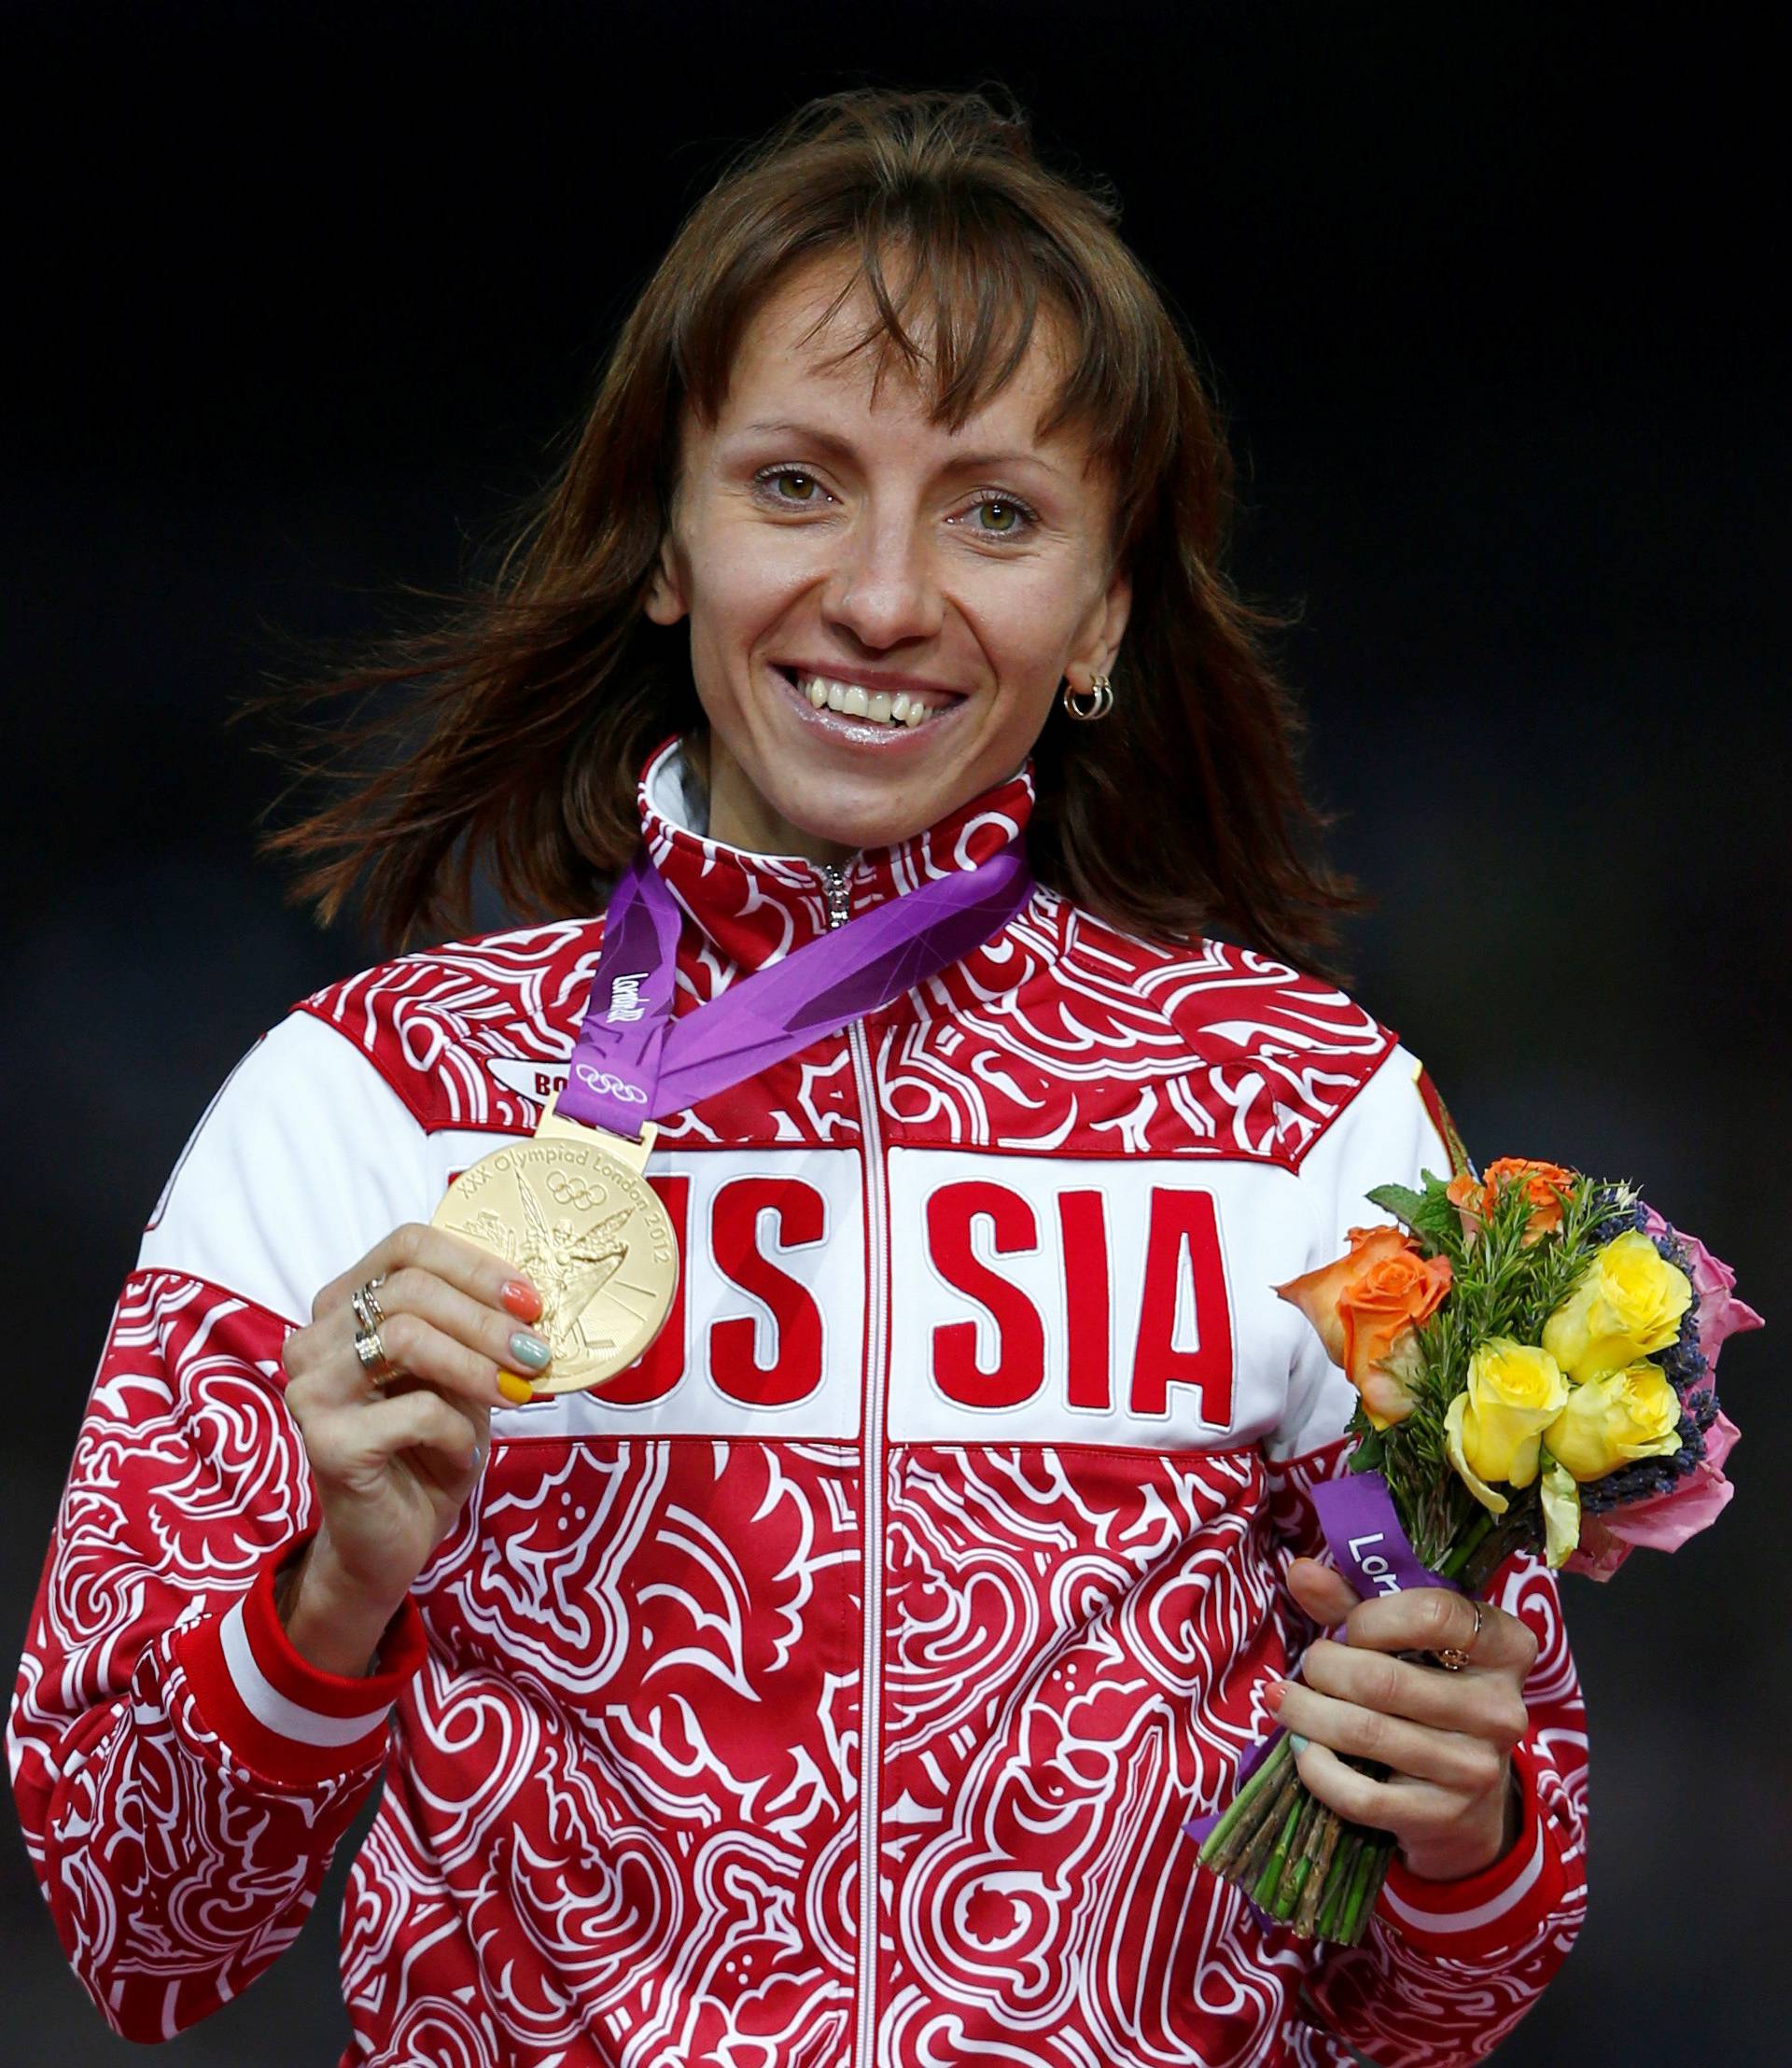 FILE PHOTO: Russia's Savinova holds her gold medal during the women's 800m victory ceremony at the London 2012 Olympic Games